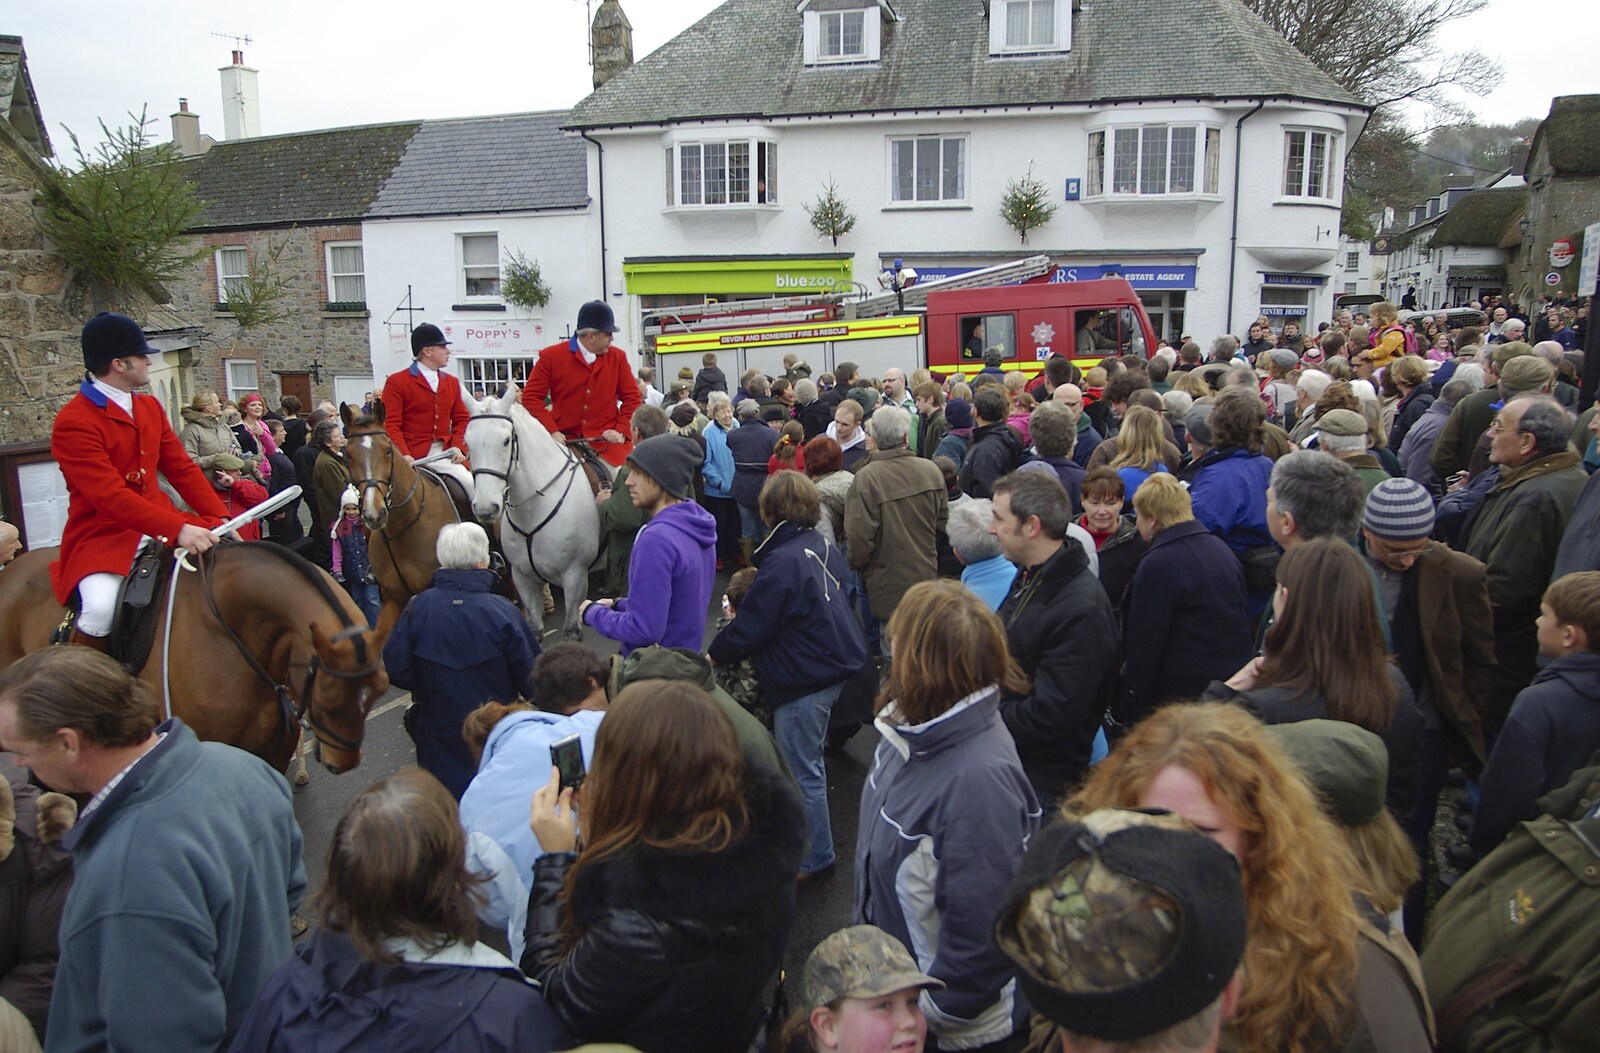 A fire engine squeezes through the crowds from A Boxing Day Hunt, Chagford, Devon - 26th December 2007